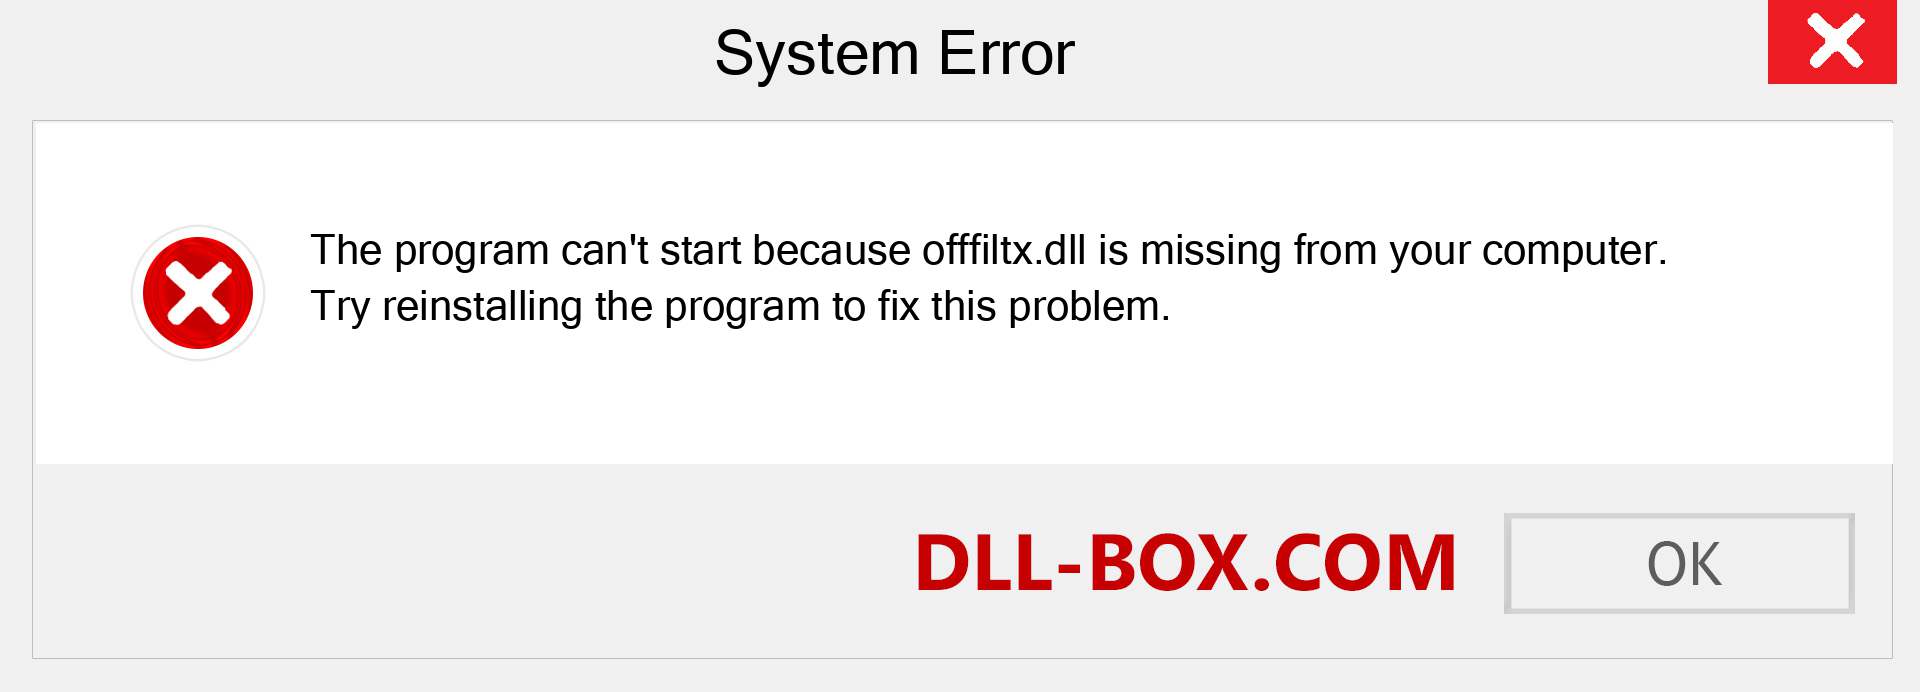  offfiltx.dll file is missing?. Download for Windows 7, 8, 10 - Fix  offfiltx dll Missing Error on Windows, photos, images